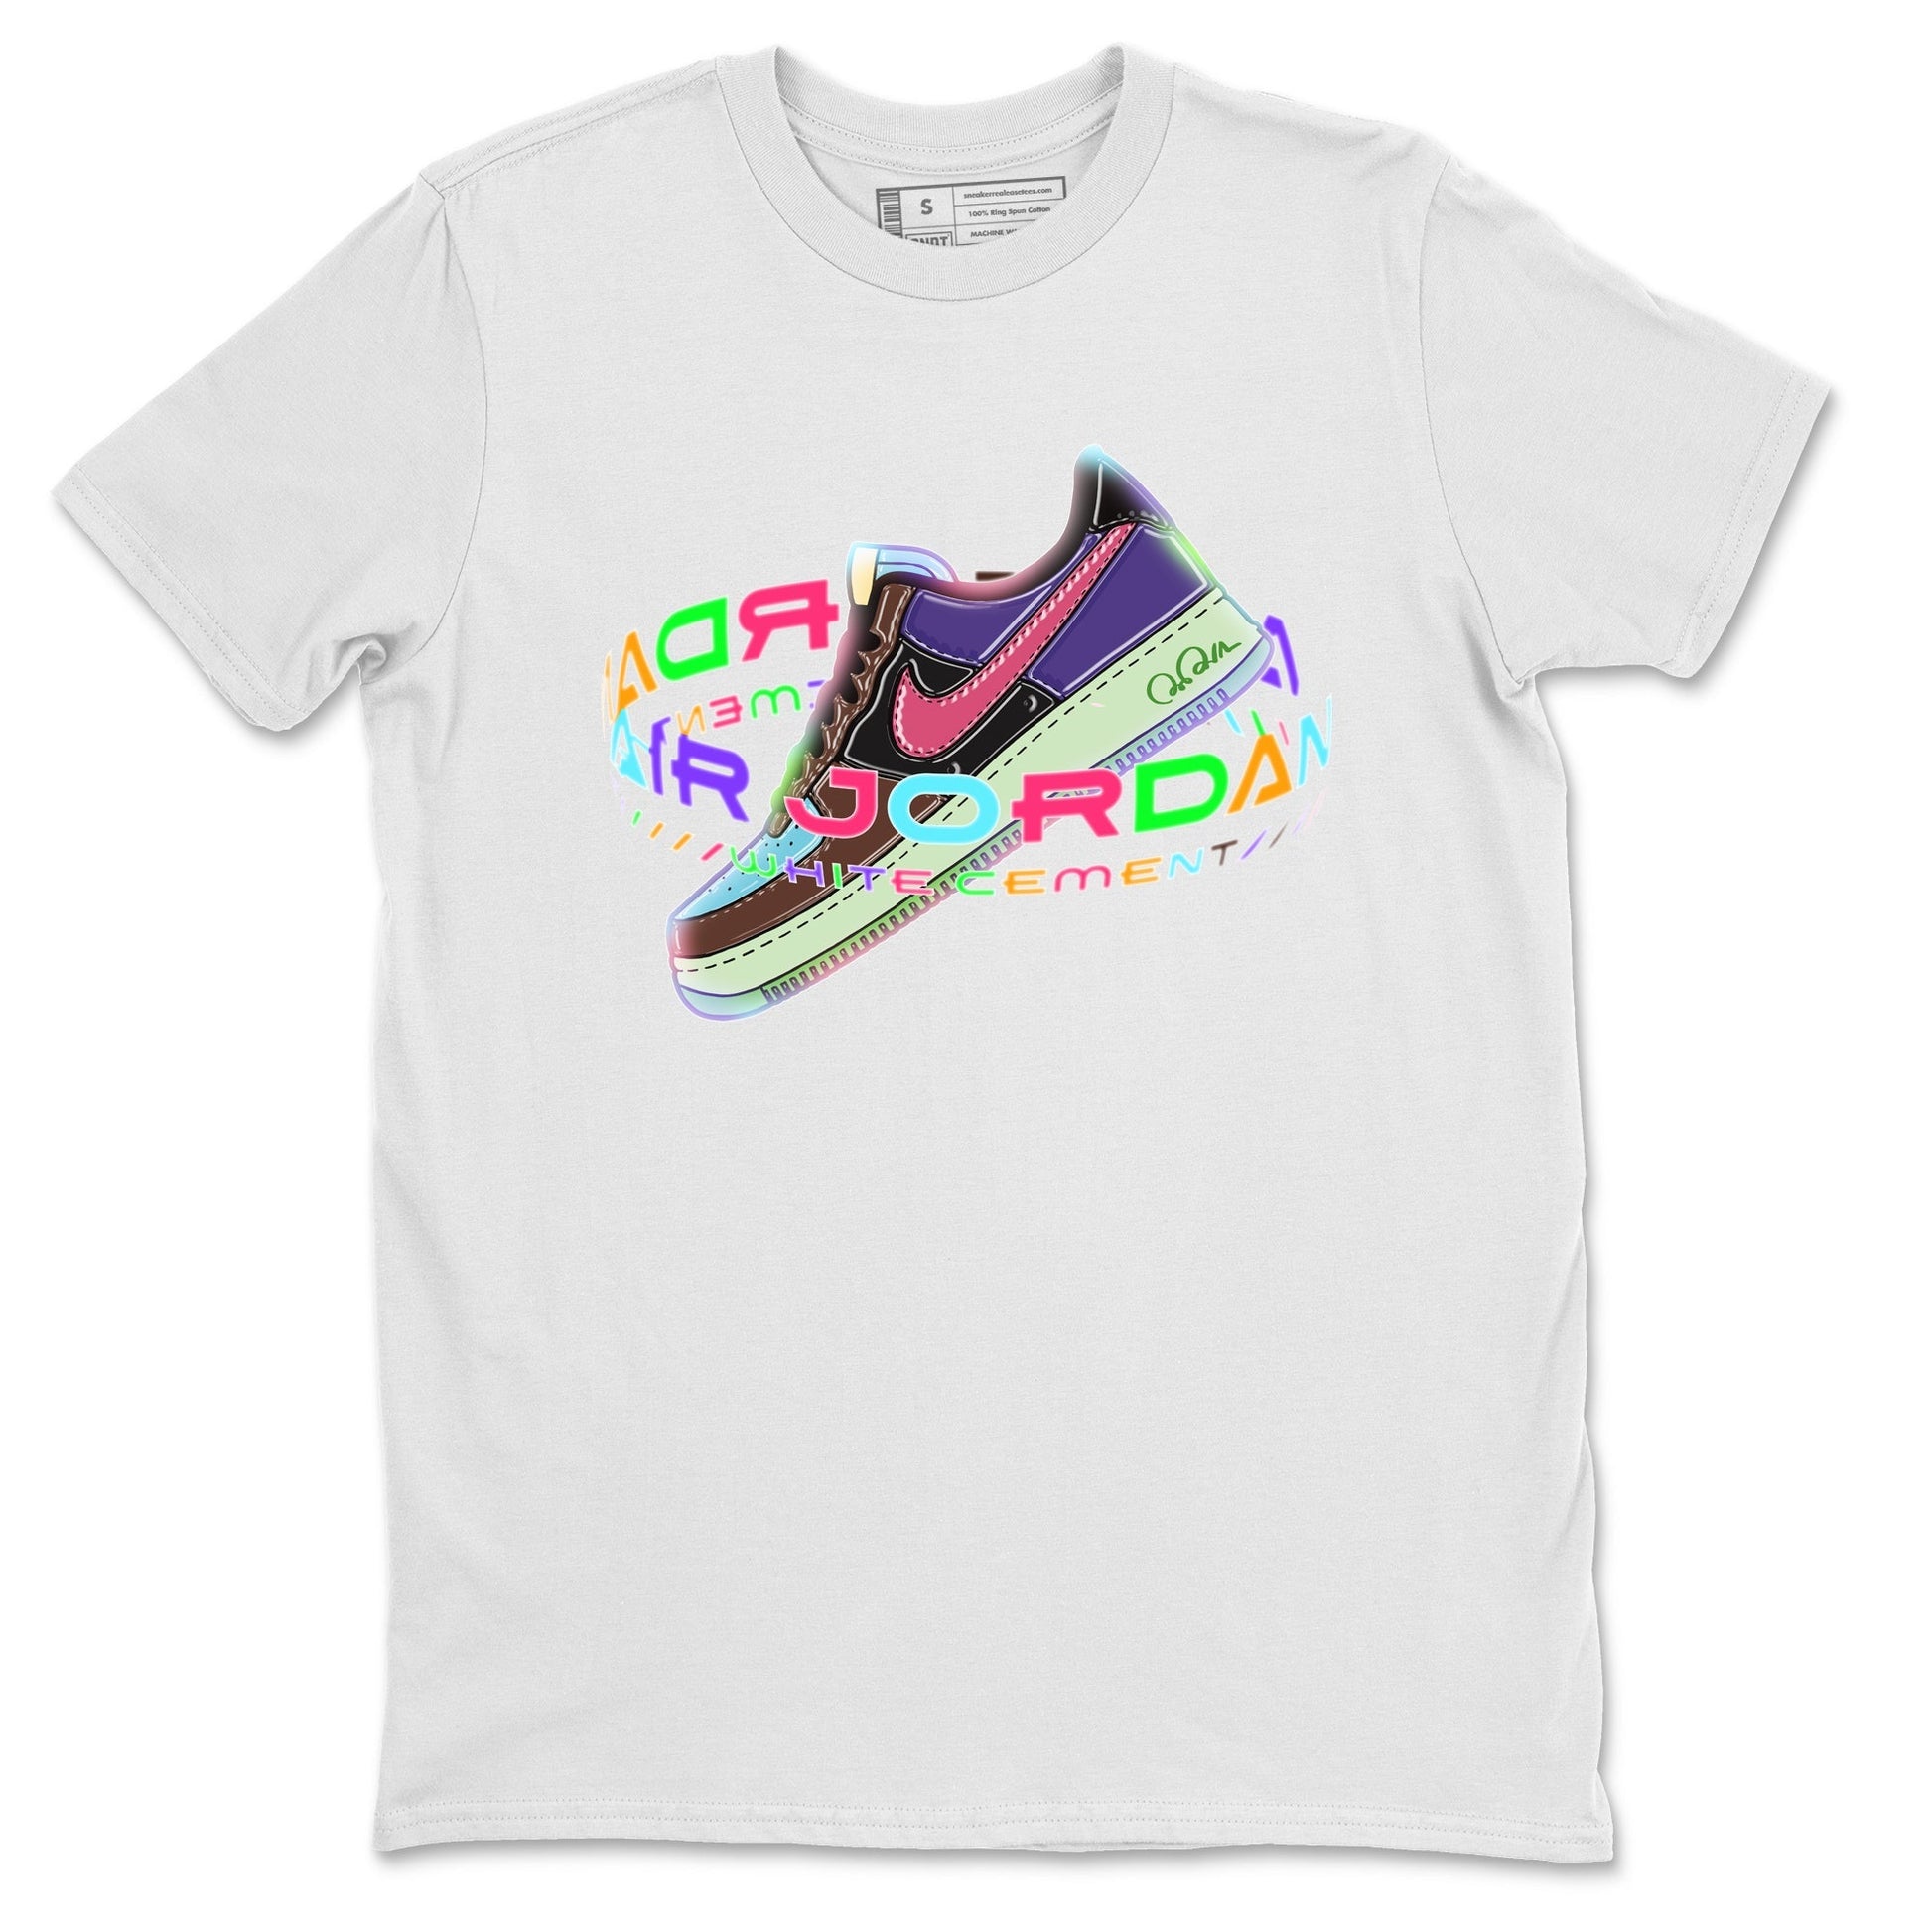 Air Force 1 Undefeated Fauna Brown Sneaker Match Tees Warping Space Sneaker Tees Air Force 1 Undefeated Fauna Brown Sneaker Release Tees Unisex Shirts